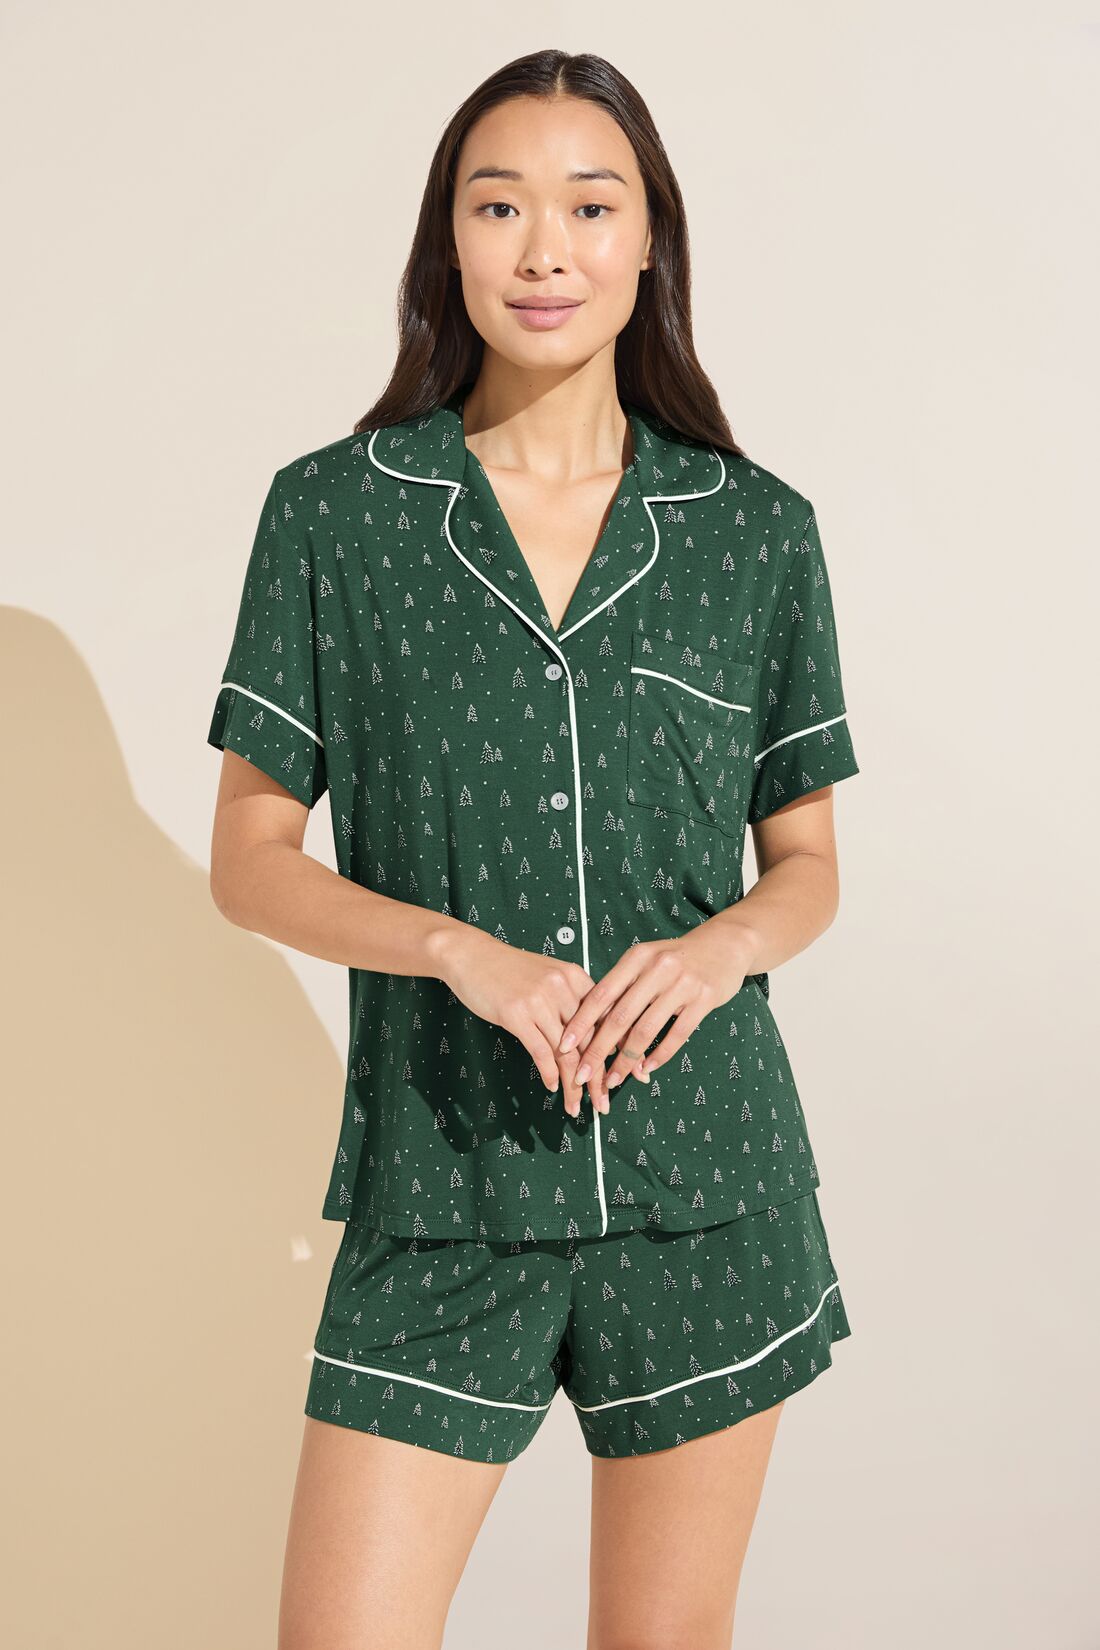 Kid's Flannel Pajama Set in Forest Green